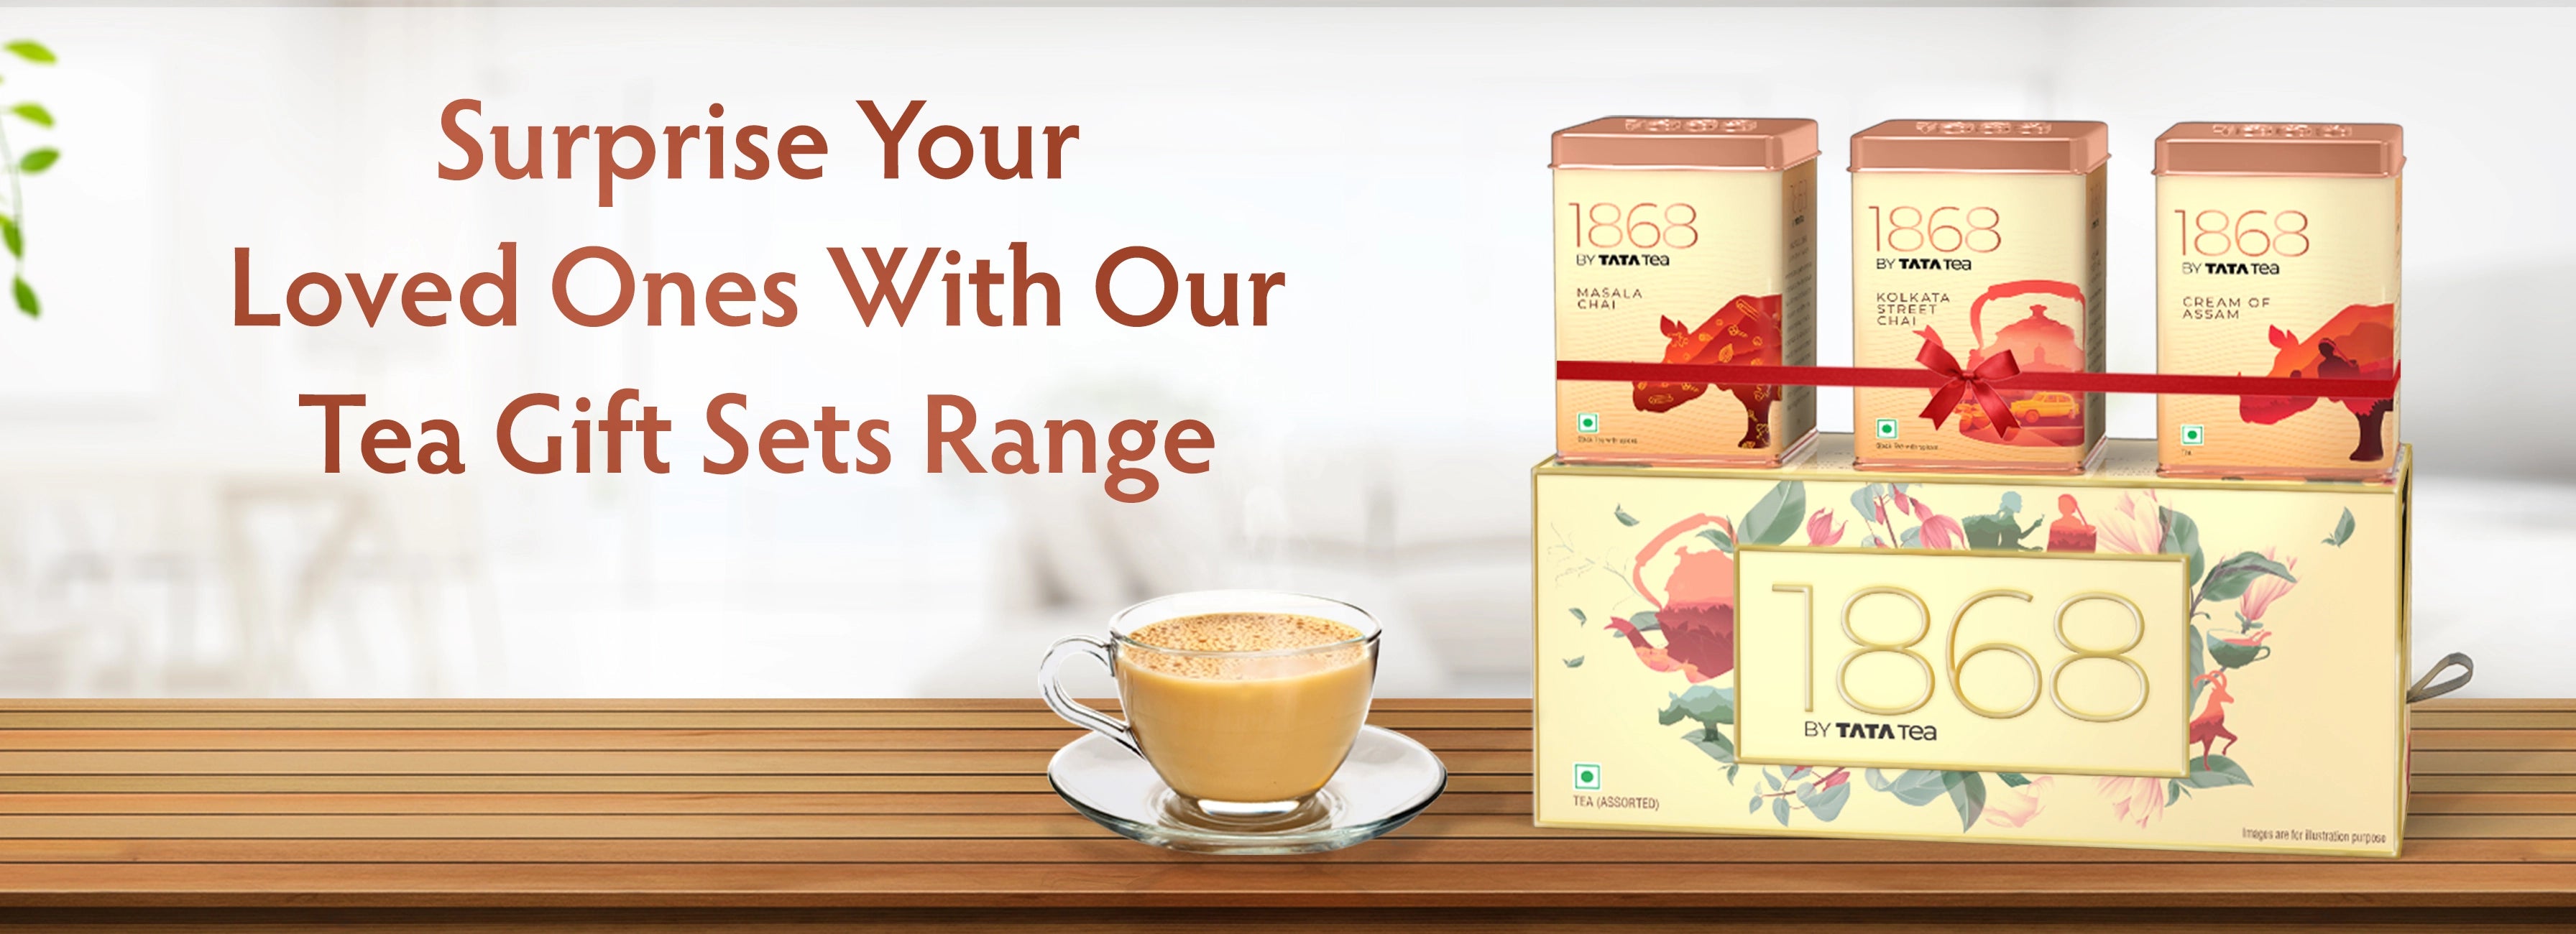 Surprise Your Loved Ones With Our Tea Gift Sets Range